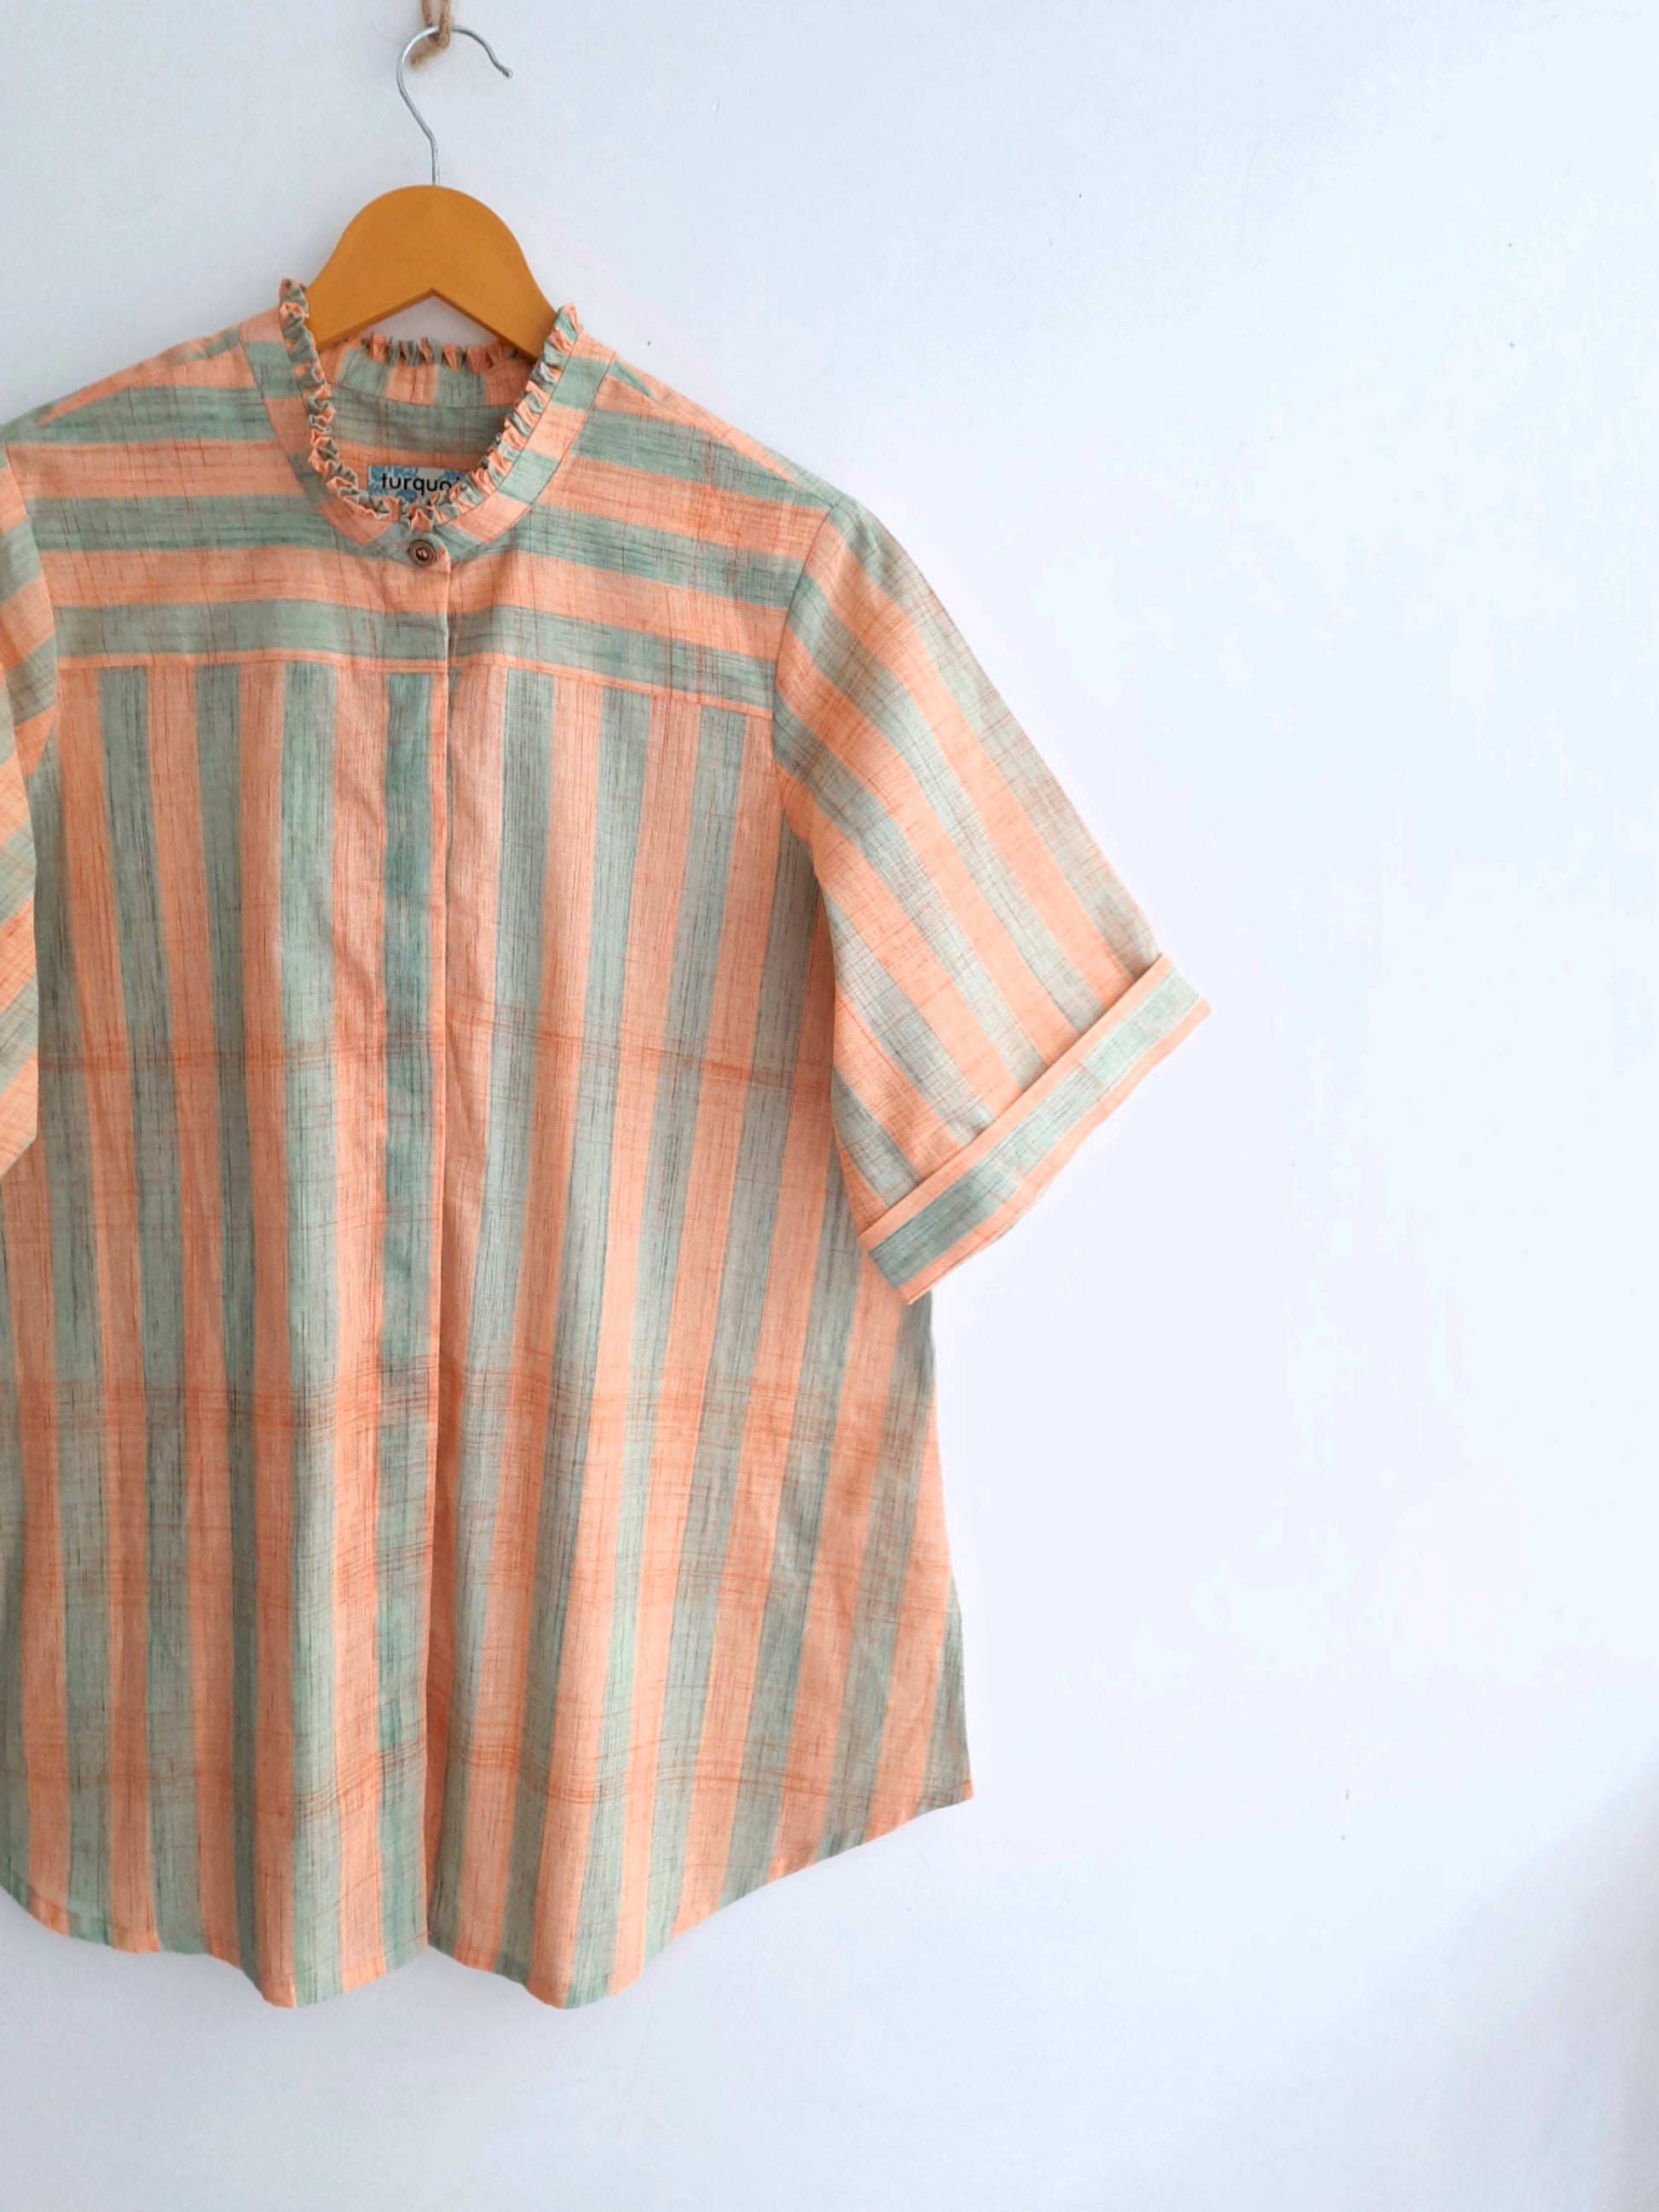 Peach and mint stripes cotton shirt for her, Consciously crafted shirt, Stripes shirt for women